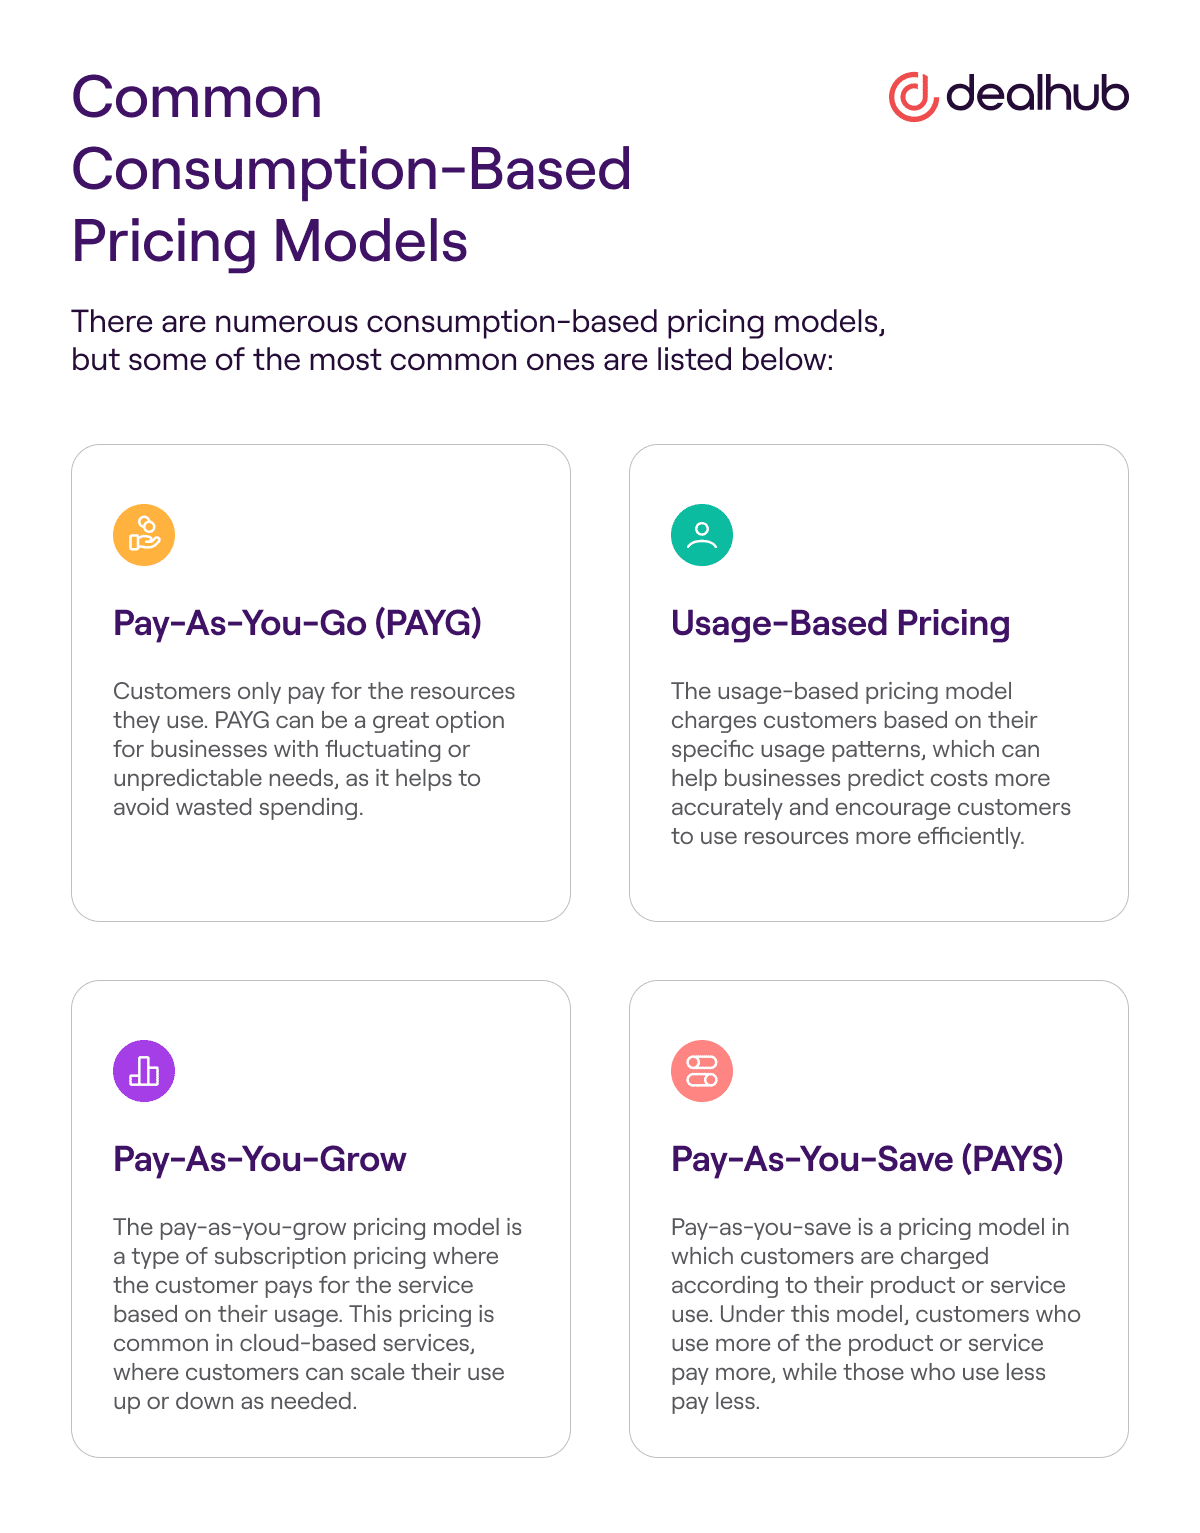 Common Consumption-Based Pricing Models